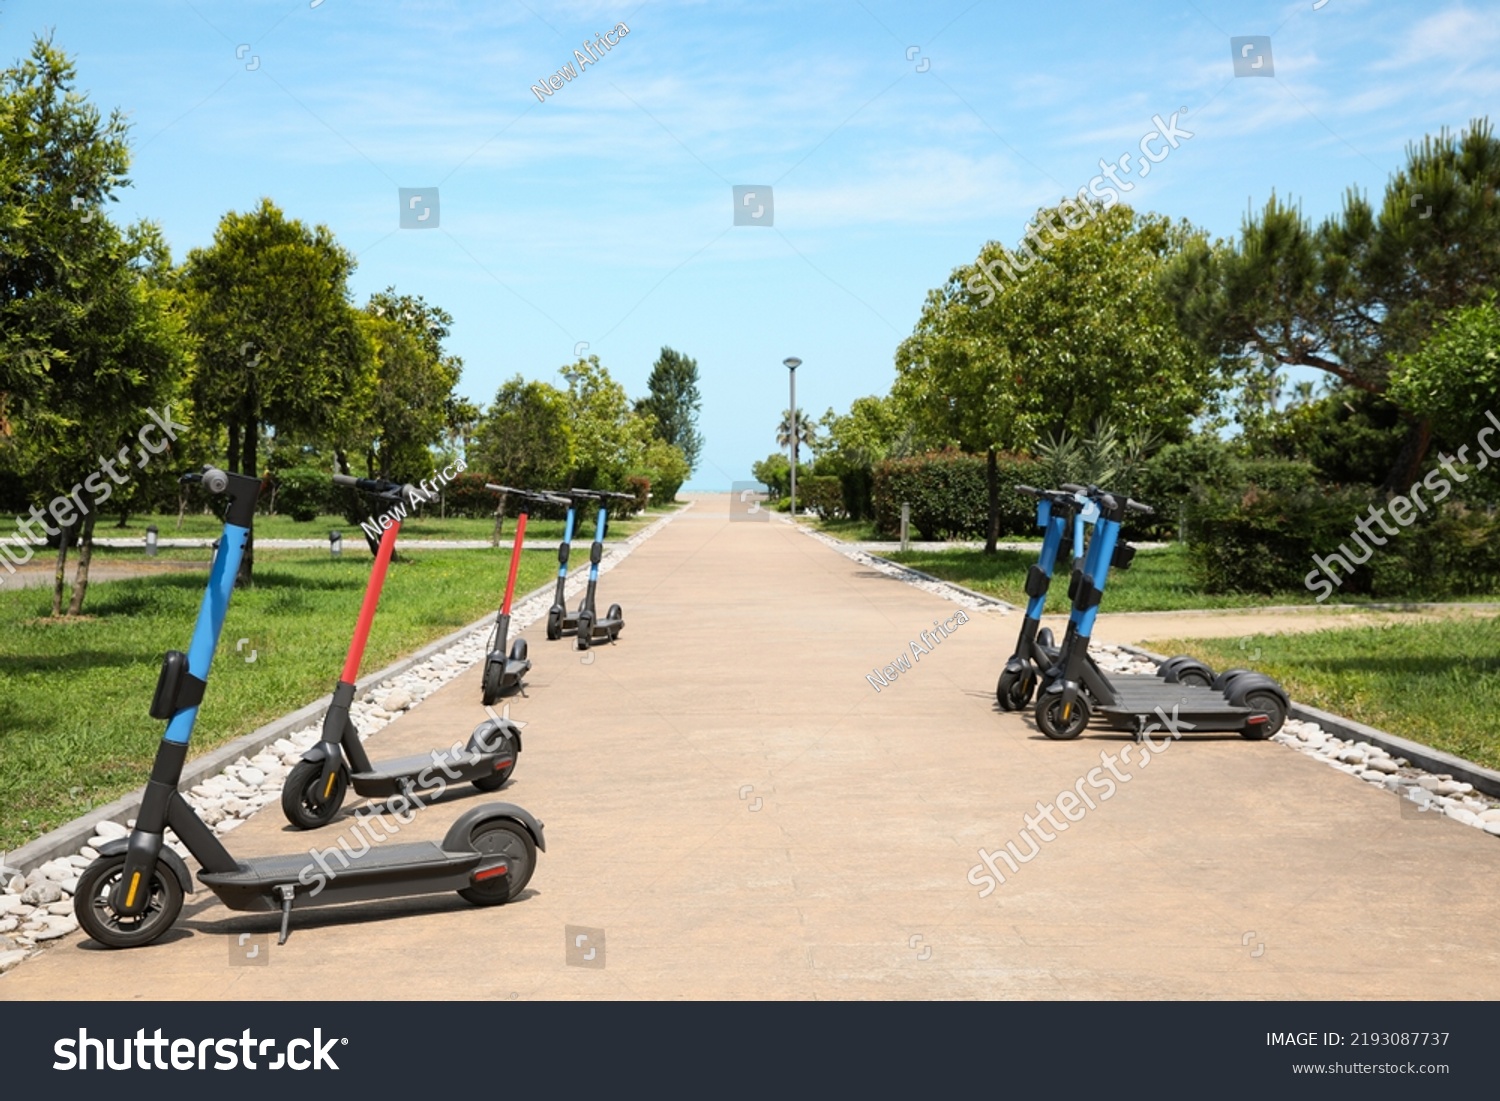 Many modern electric scooters in park. Rental service #2193087737